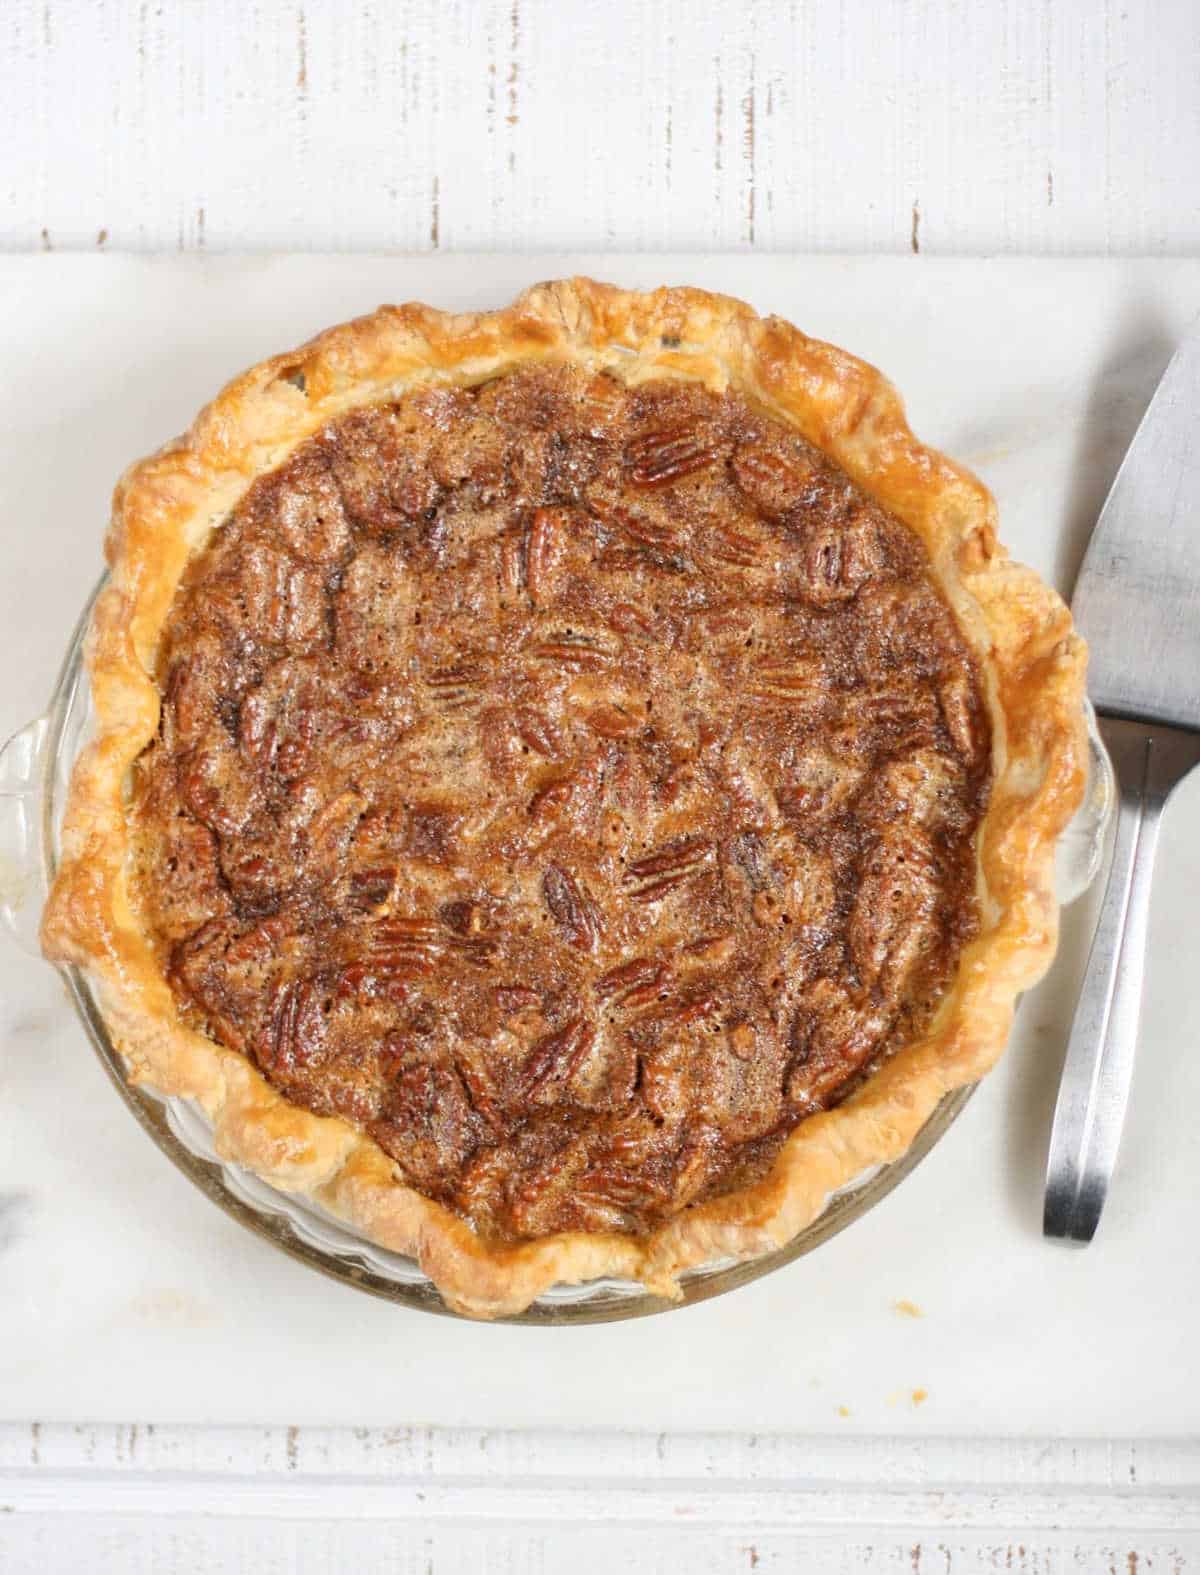 Pecan pie with golden browned crust on white reclaimed wood, metal pie server to right.